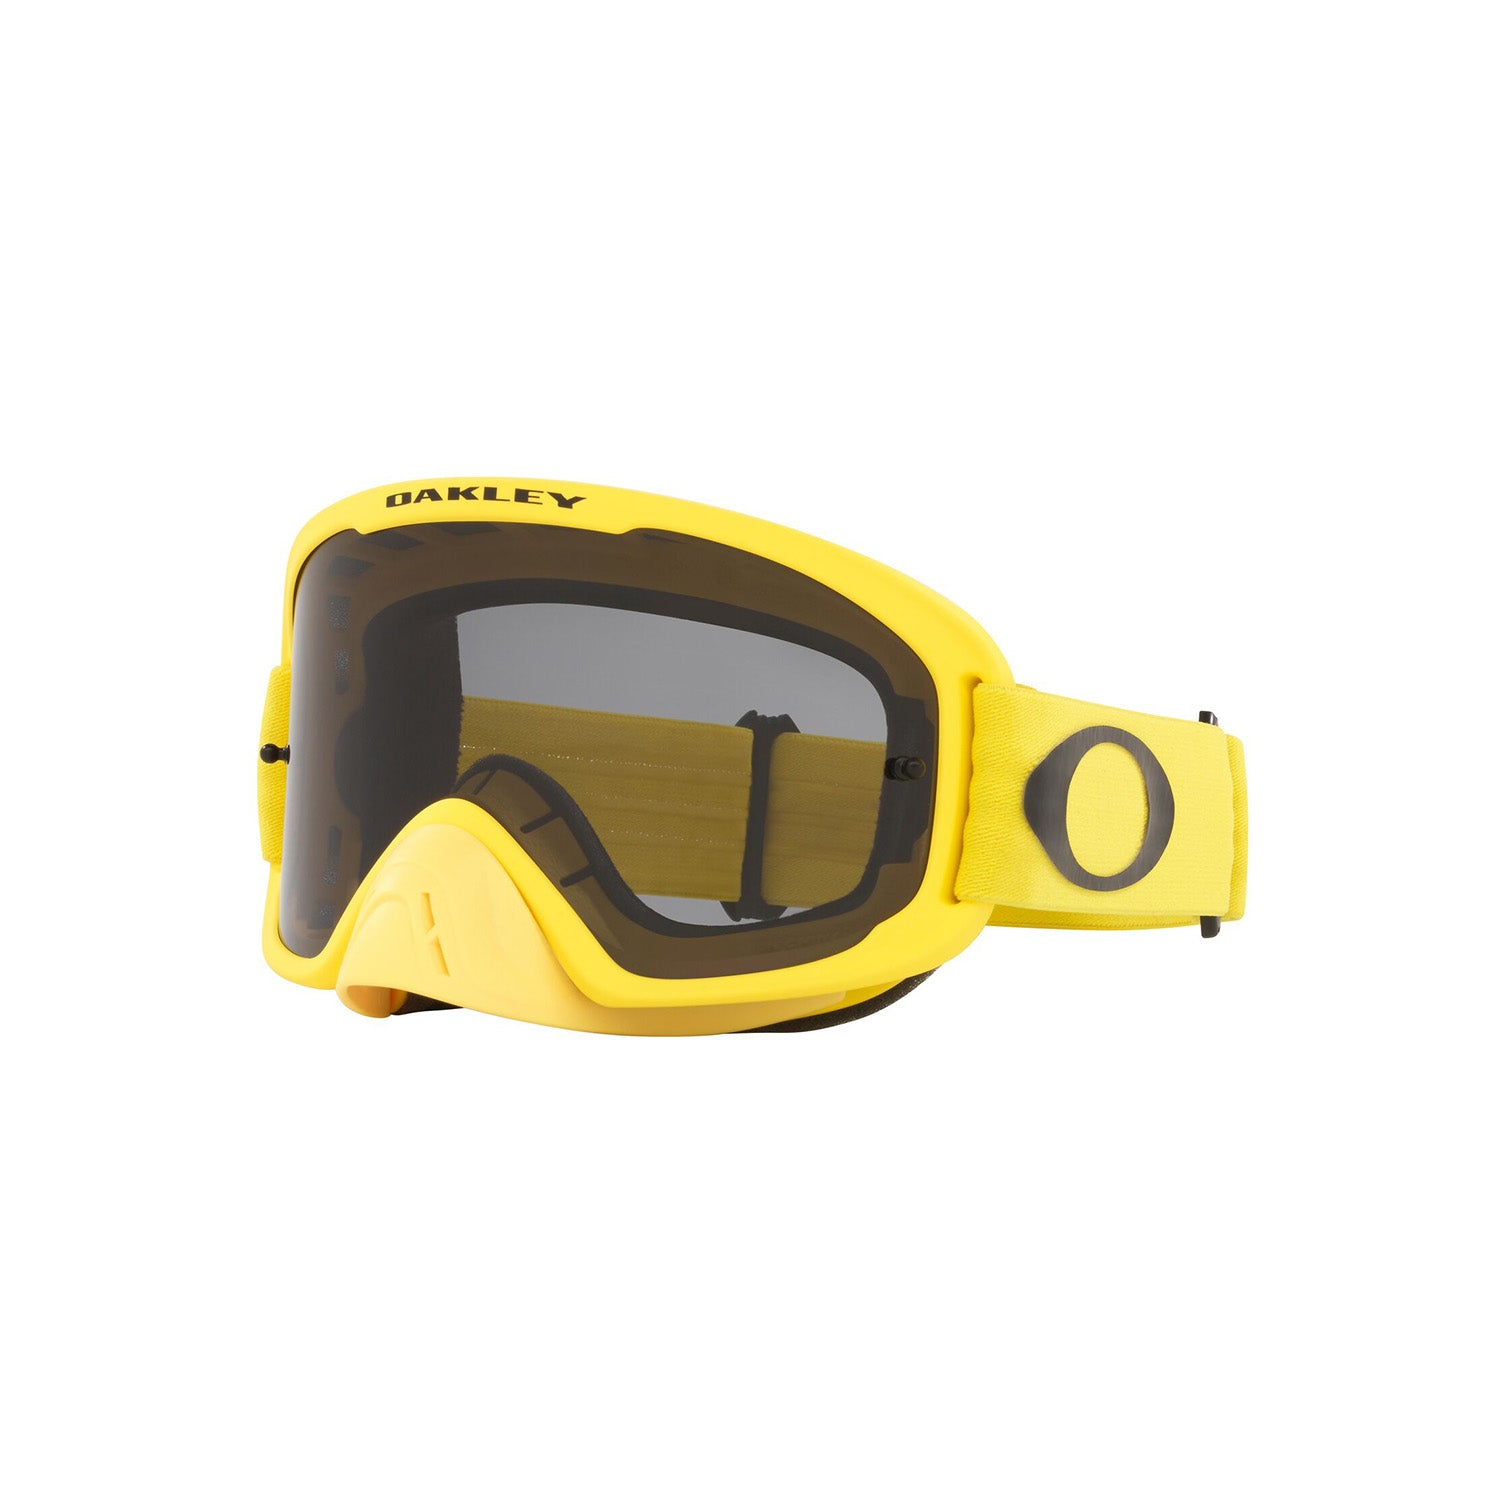 Oakley O Frame 2.0 Pro MX Goggle in Moto Yellow with Clear Lens